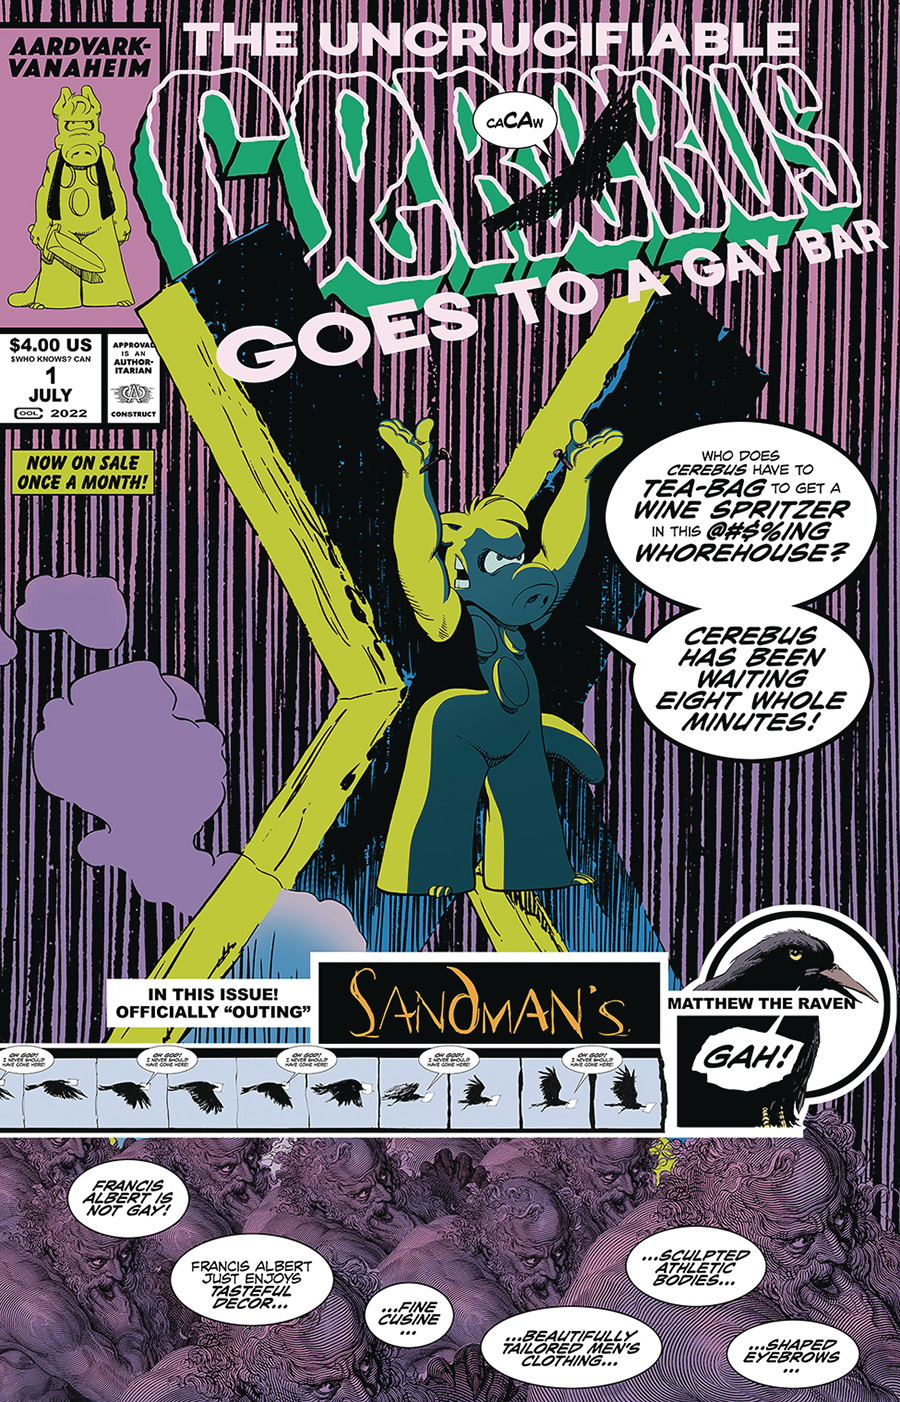 Cerebus In Hell Presents Uncrucifiable Cerebus Gay Bar #1 (One Shot)